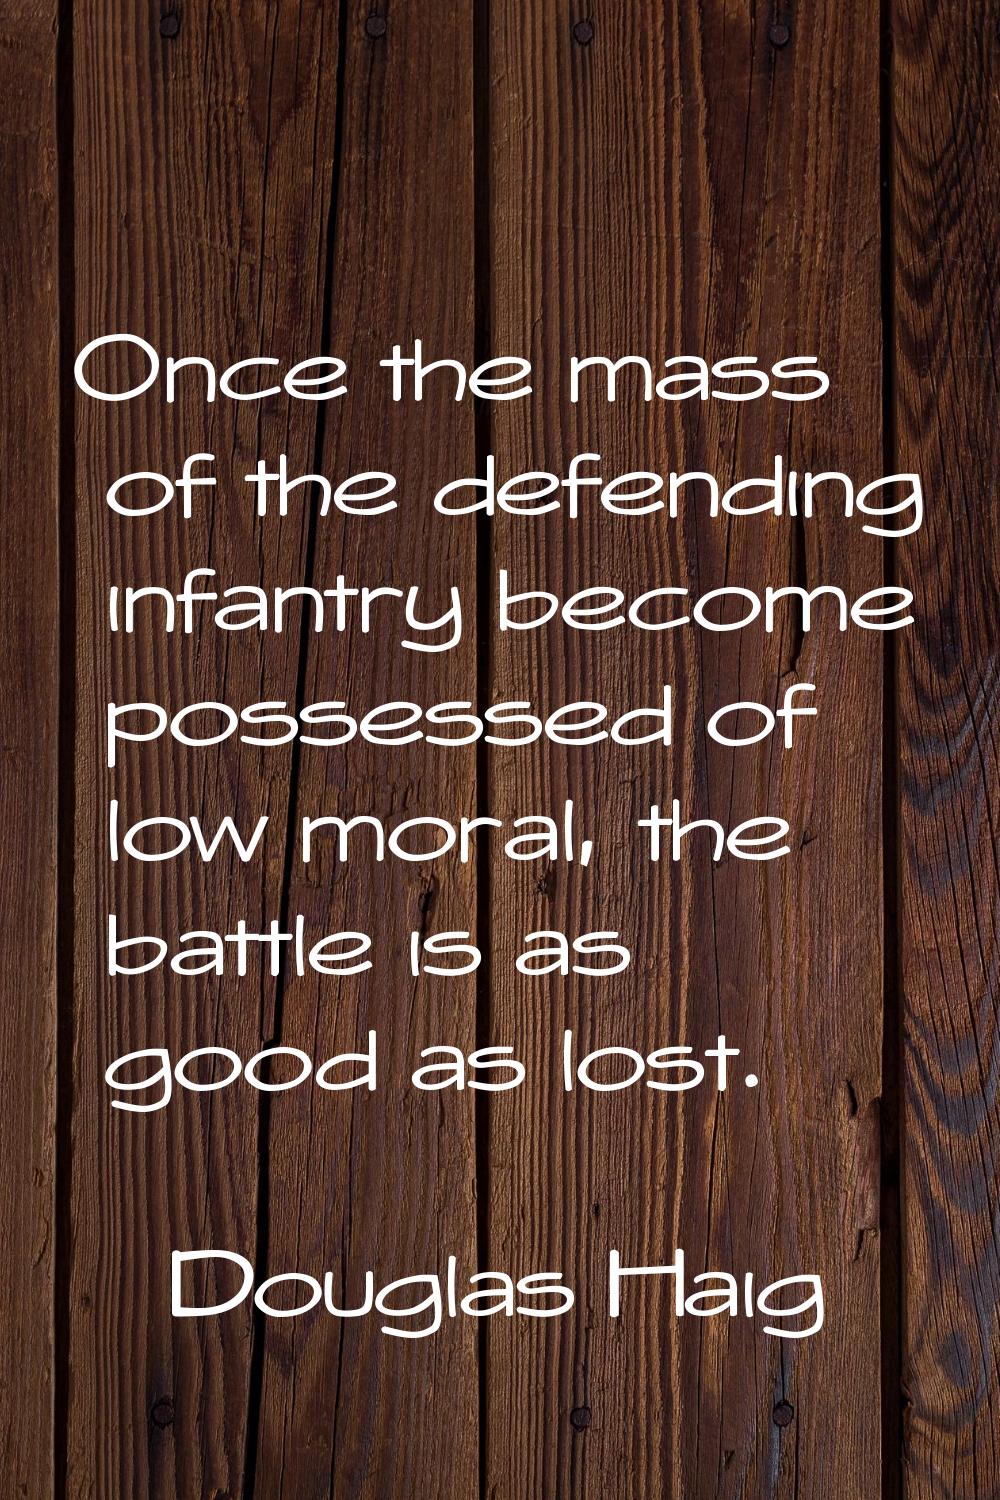 Once the mass of the defending infantry become possessed of low moral, the battle is as good as los